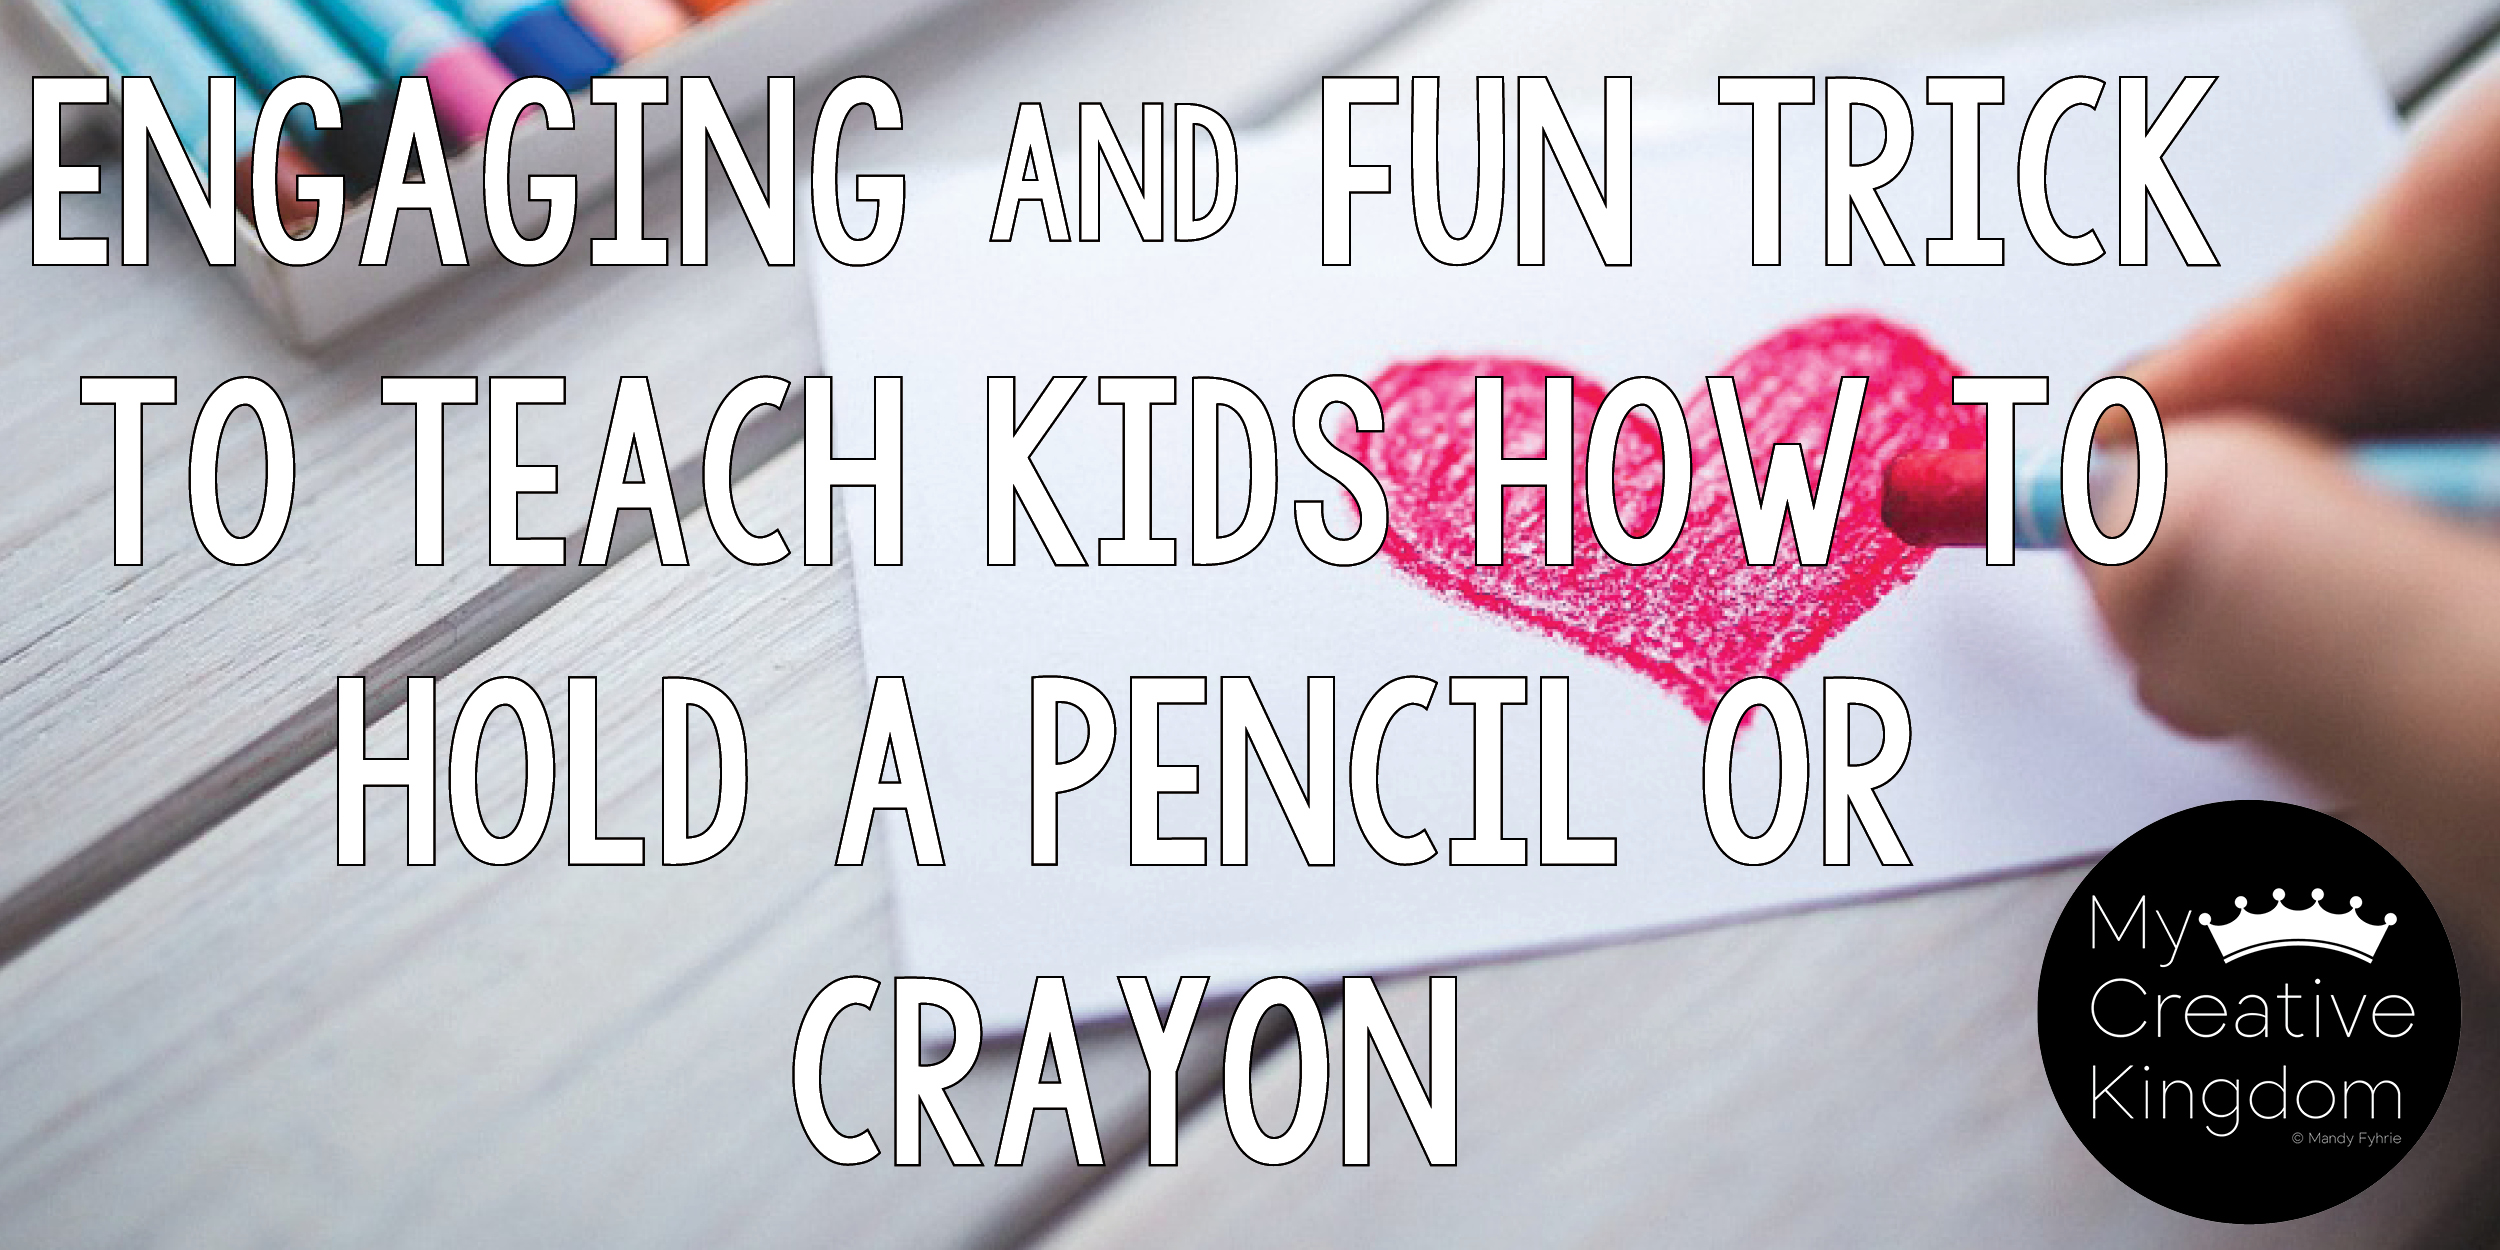 Engaging and Fun Trick to Teach Kids how to Hold a Pencil or Crayon